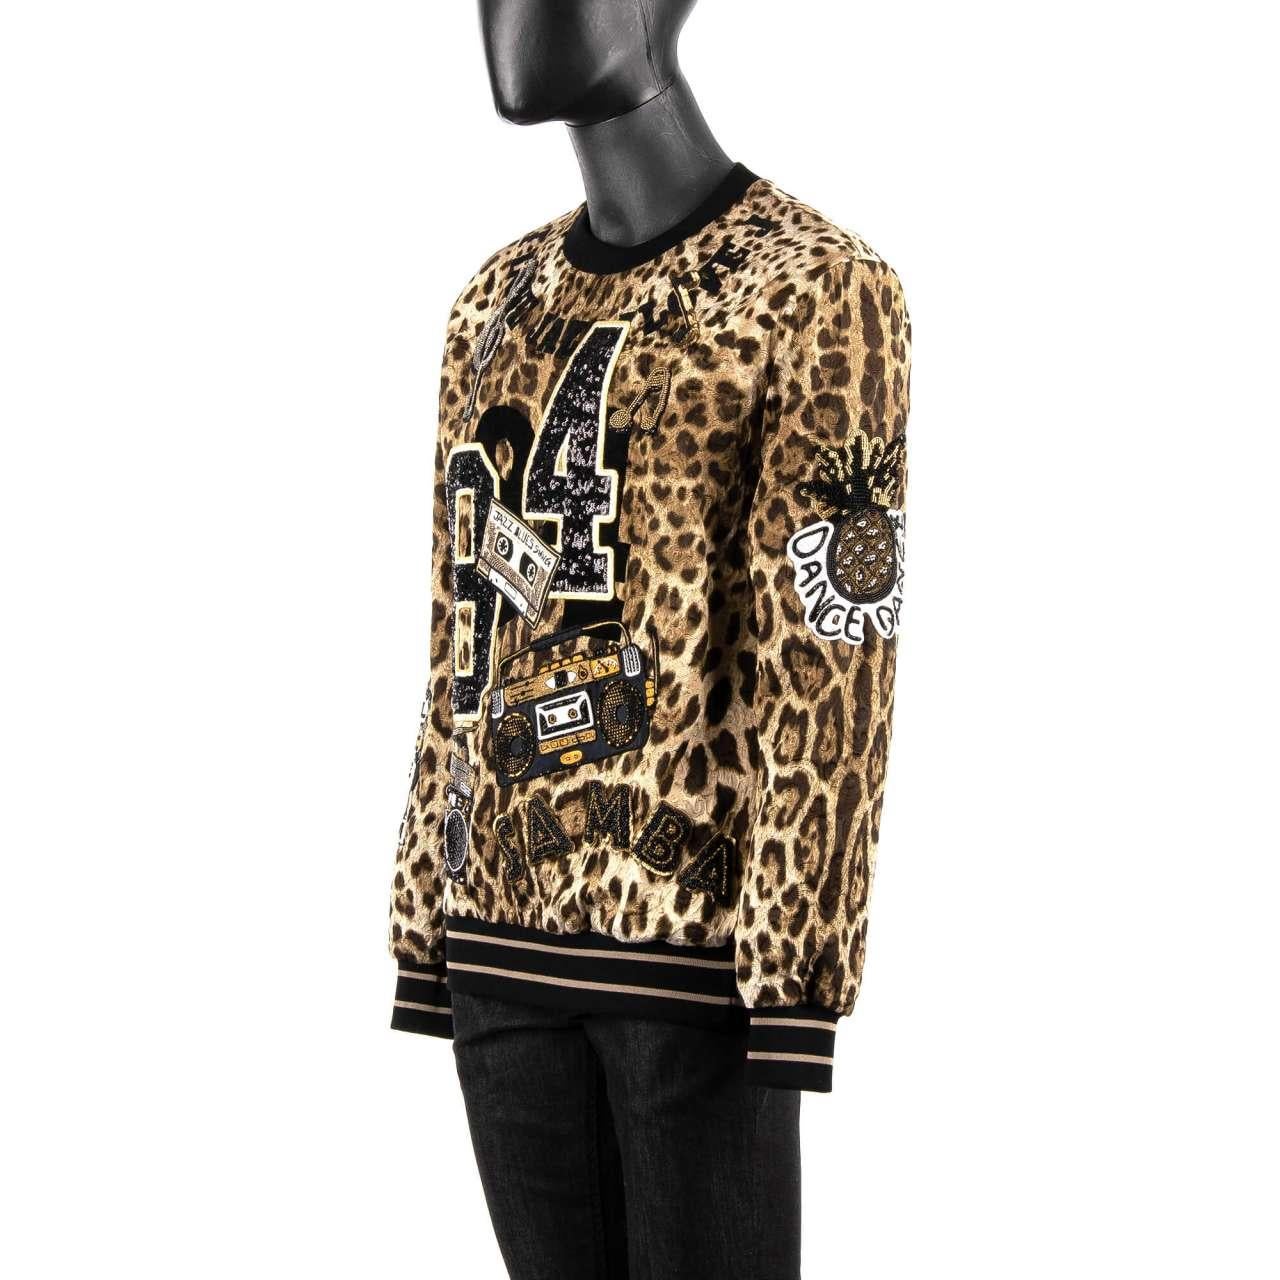 D&G Leopard Printed Sweater with Jazz Samba Music Embroidery Black Brown 54 In Excellent Condition For Sale In Erkrath, DE